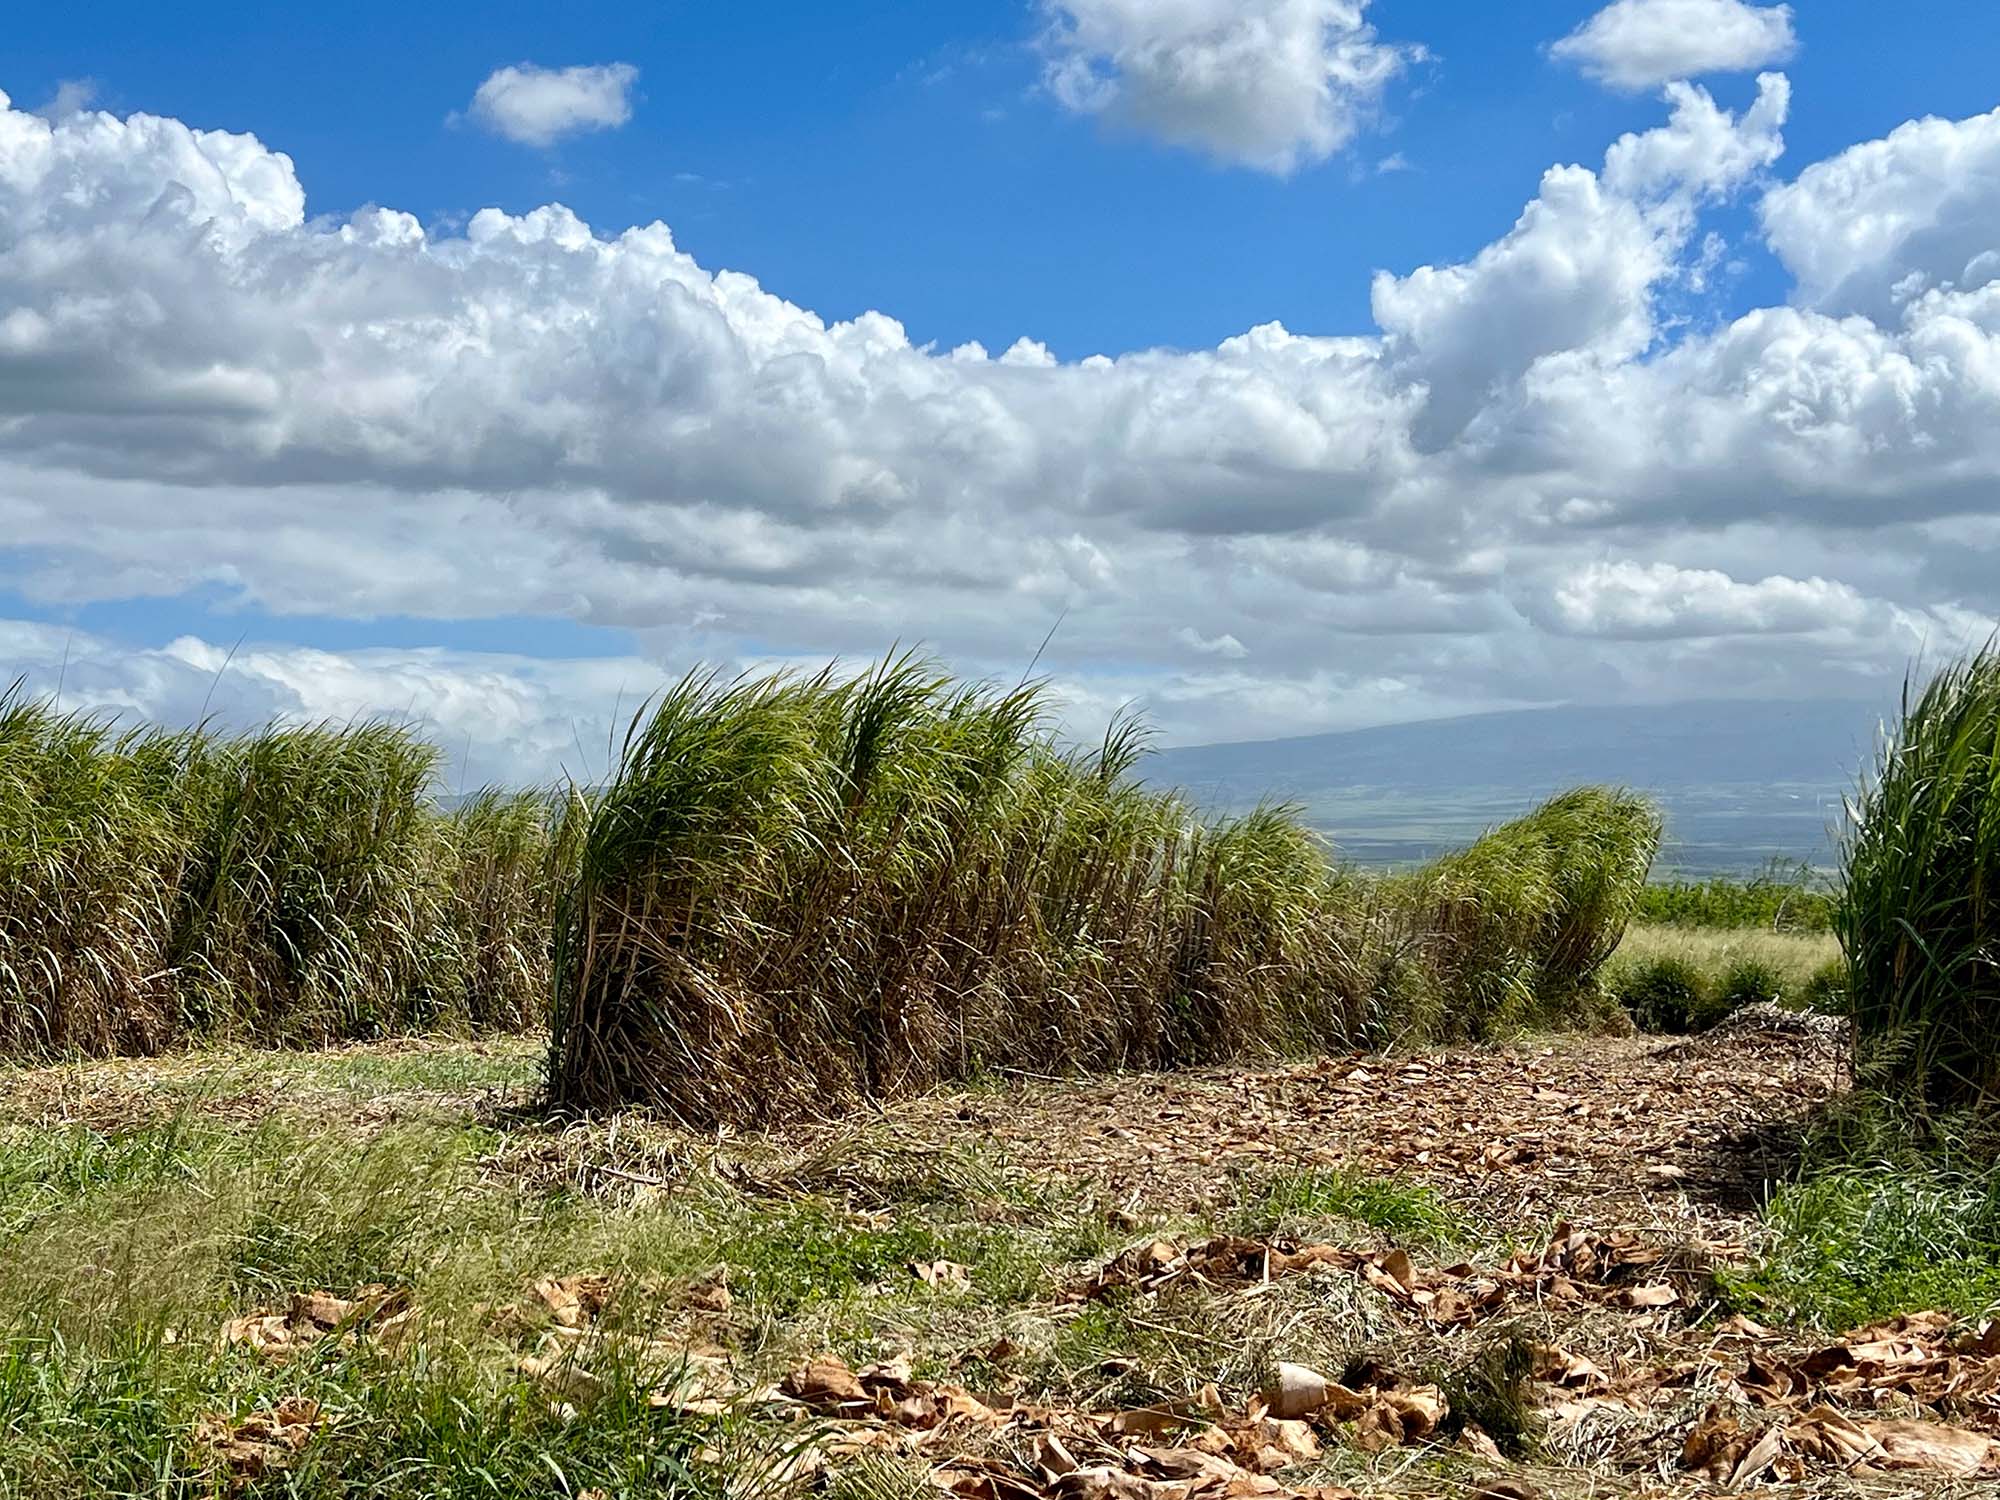 Sugarcane windbreaks are spaced appropriately for their cash crop to receive proper wind protection. (Reference more information on designing in-feld and perimeter windbreak systems at https://learn.oahurcd.org/training-sessions/course/soil-health-cohort-session-4).